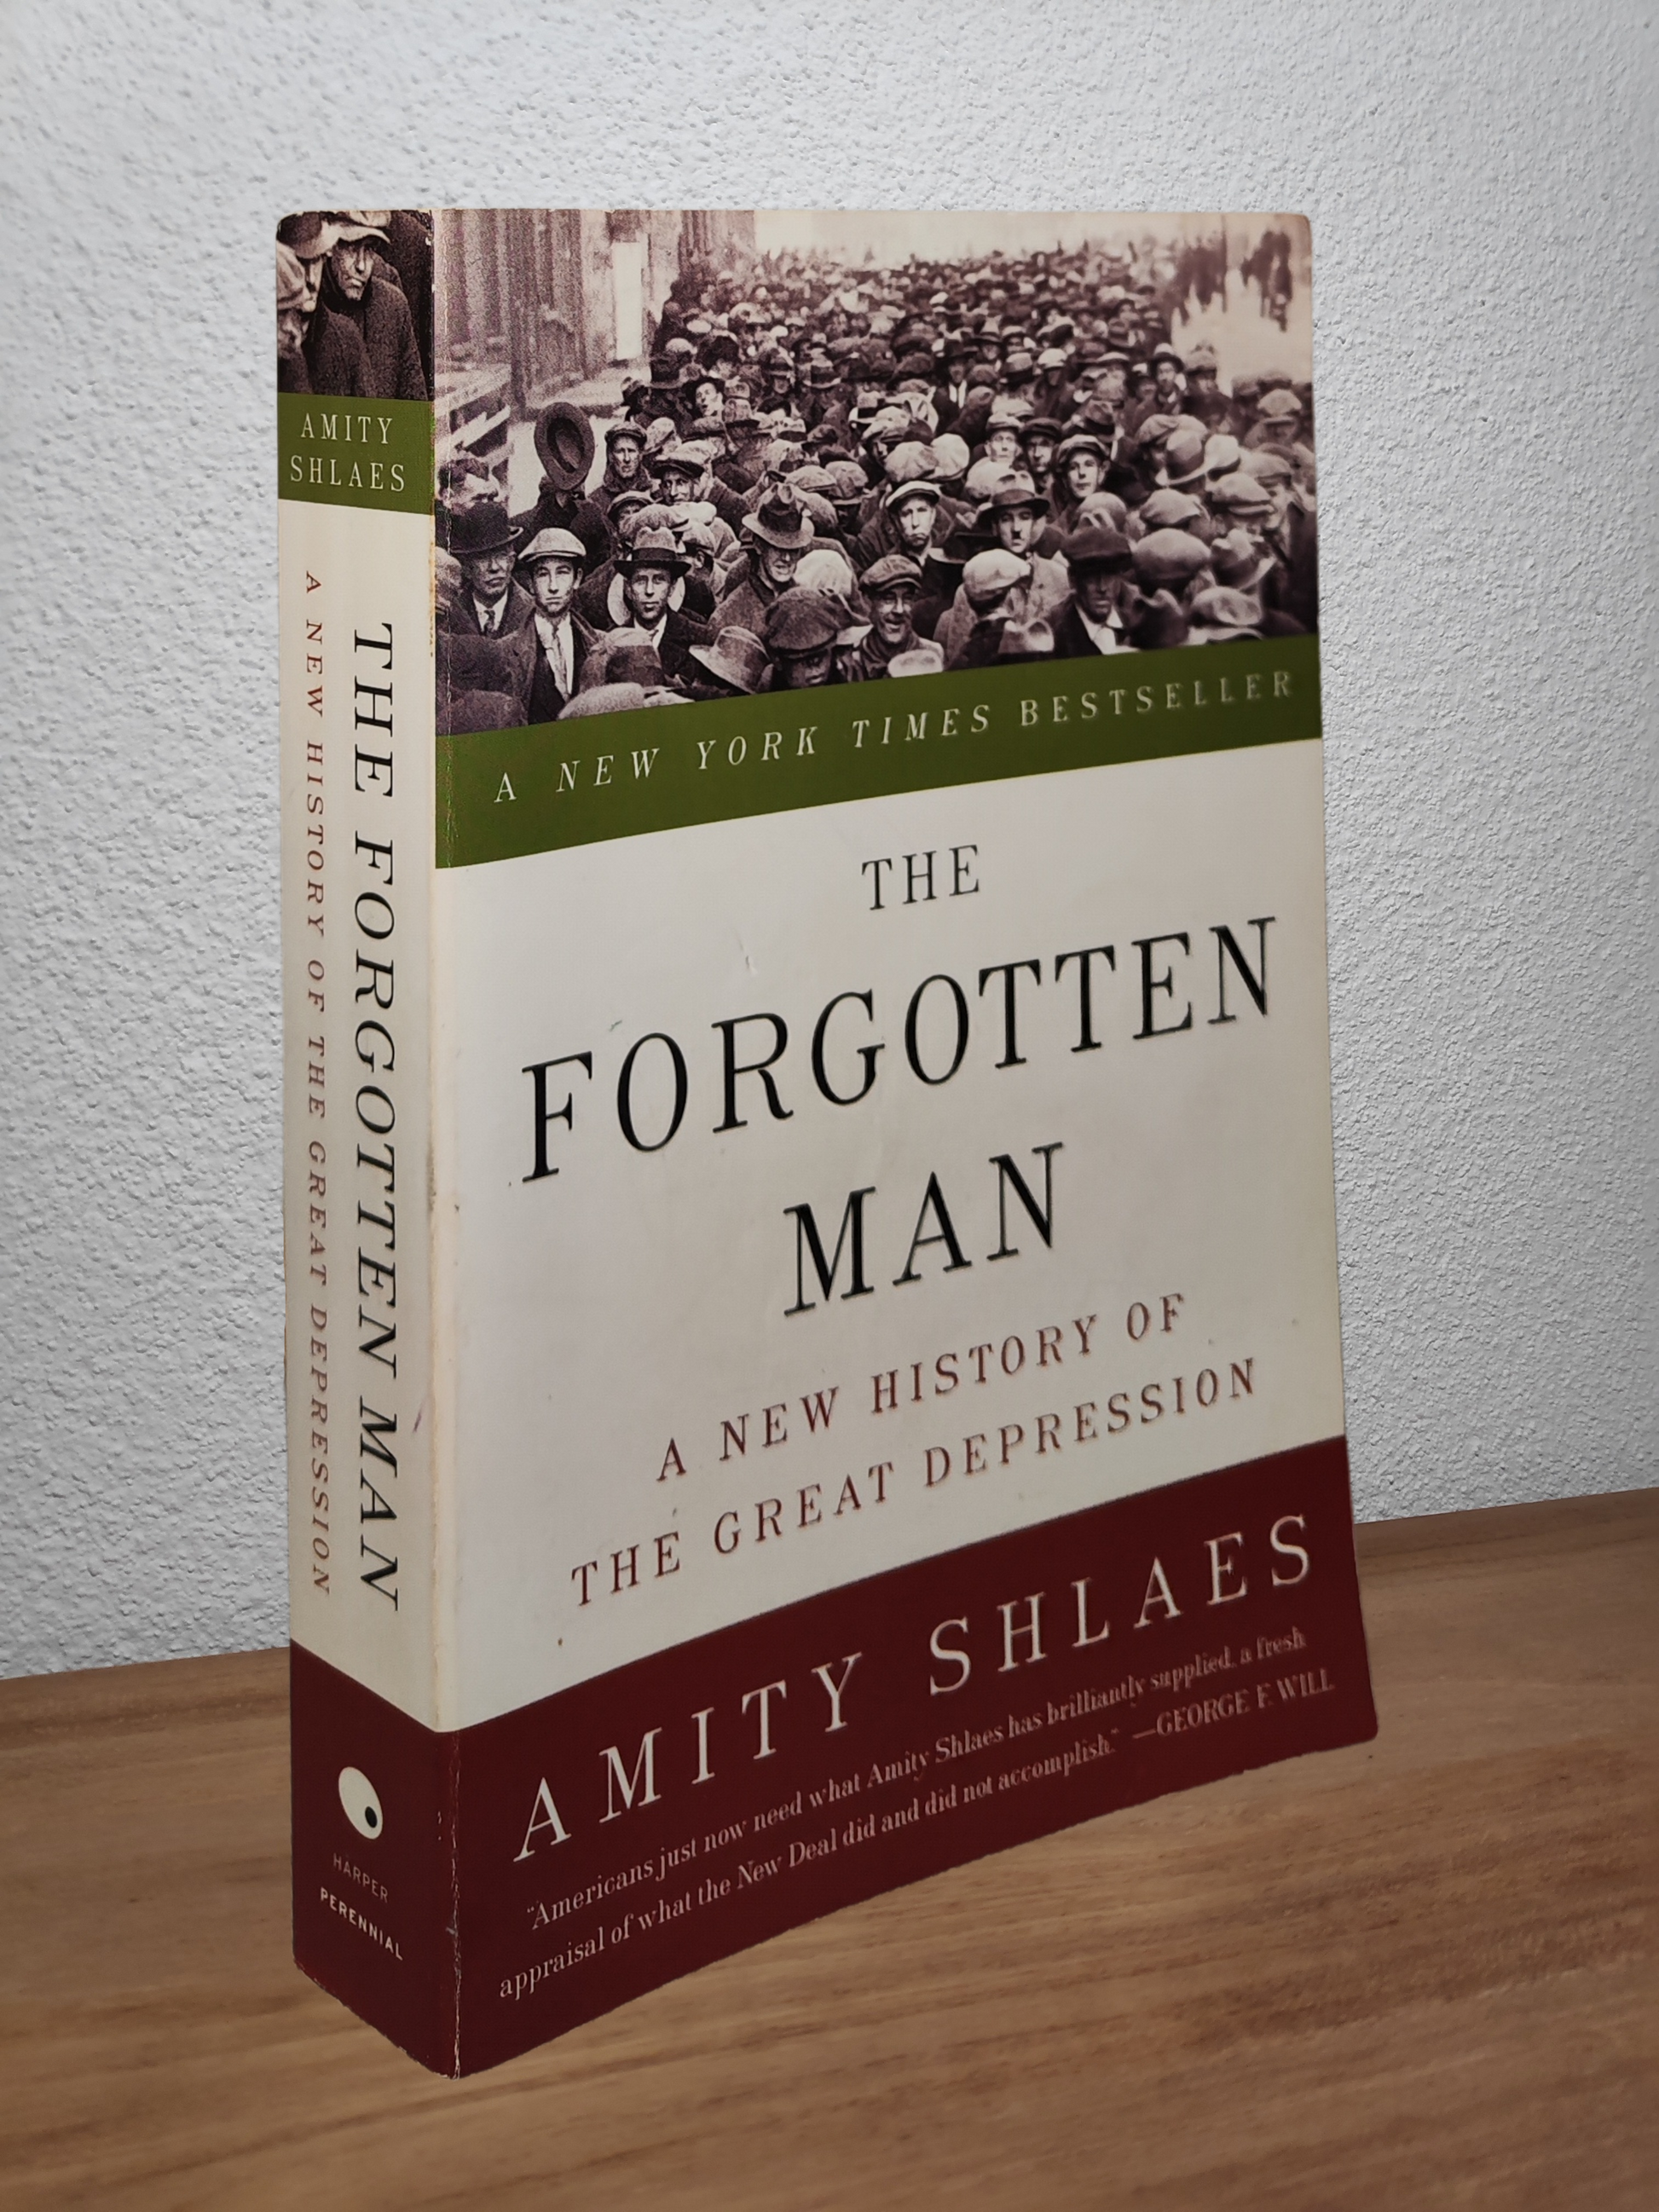 Amity Shlaes - The Forgotten Man  - Second-hand english book to deliver in Zurich & Switzerland